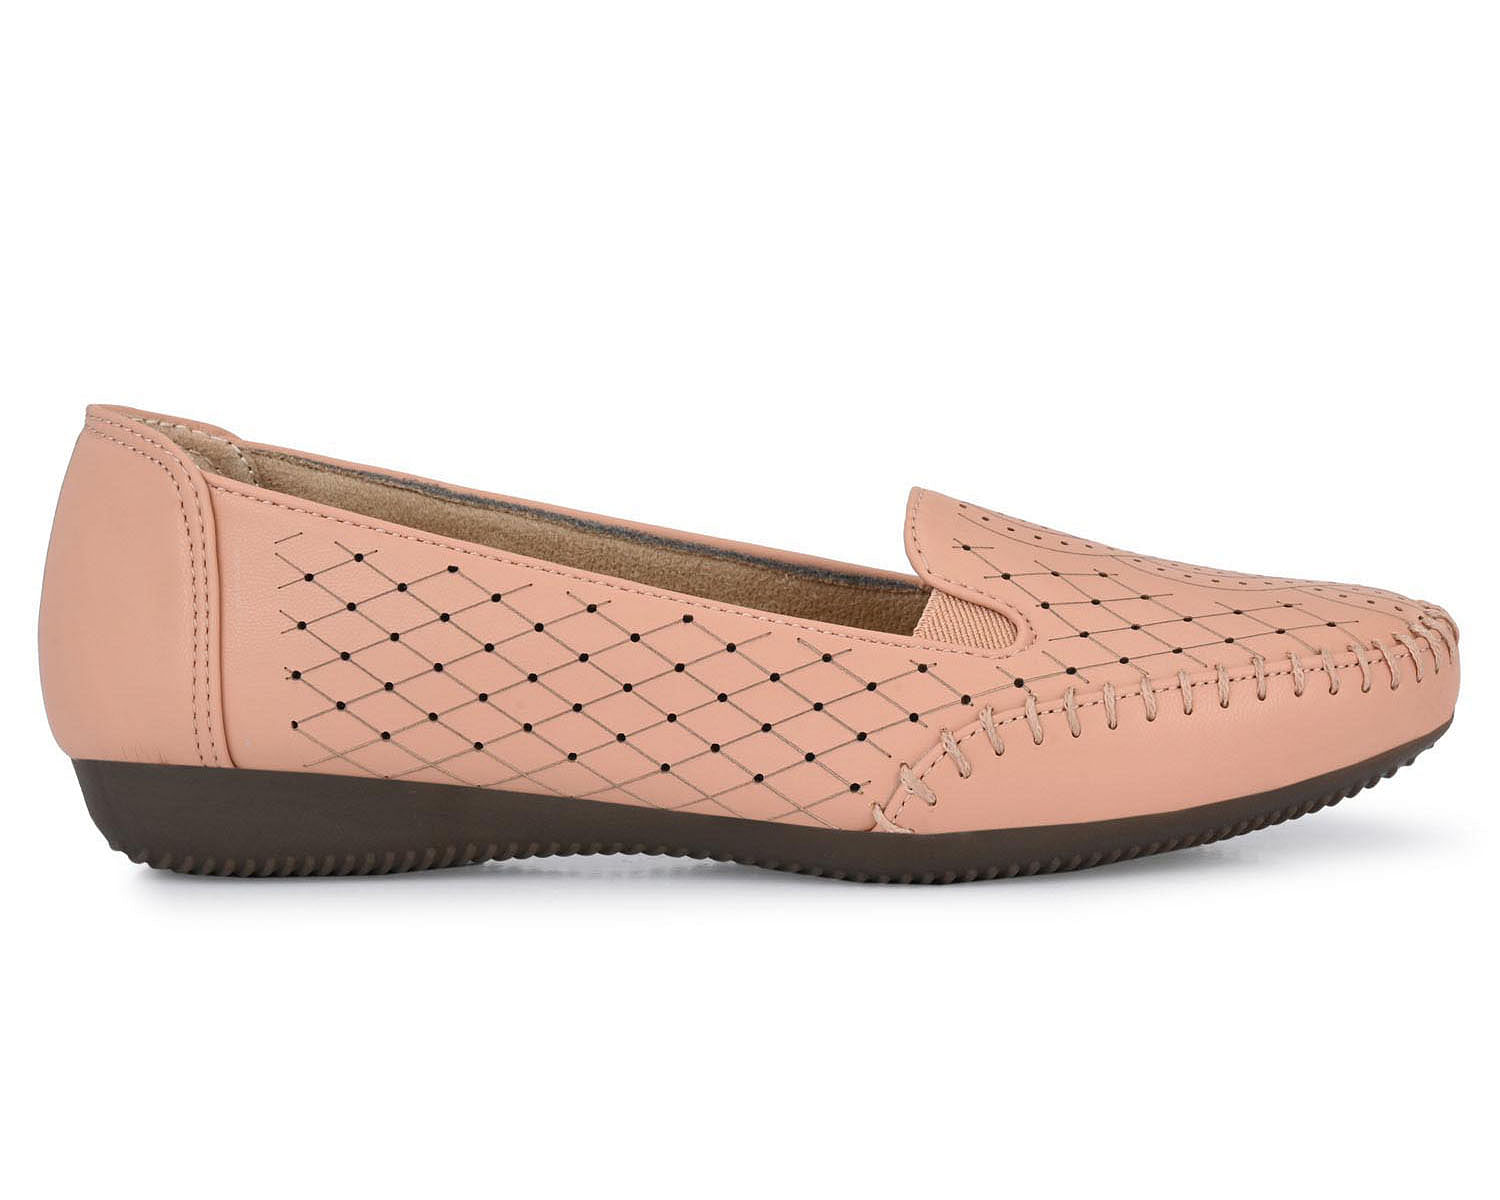 Pair-it Wmn Formal Belly-IMP-WMN-Loafers-216-Peach